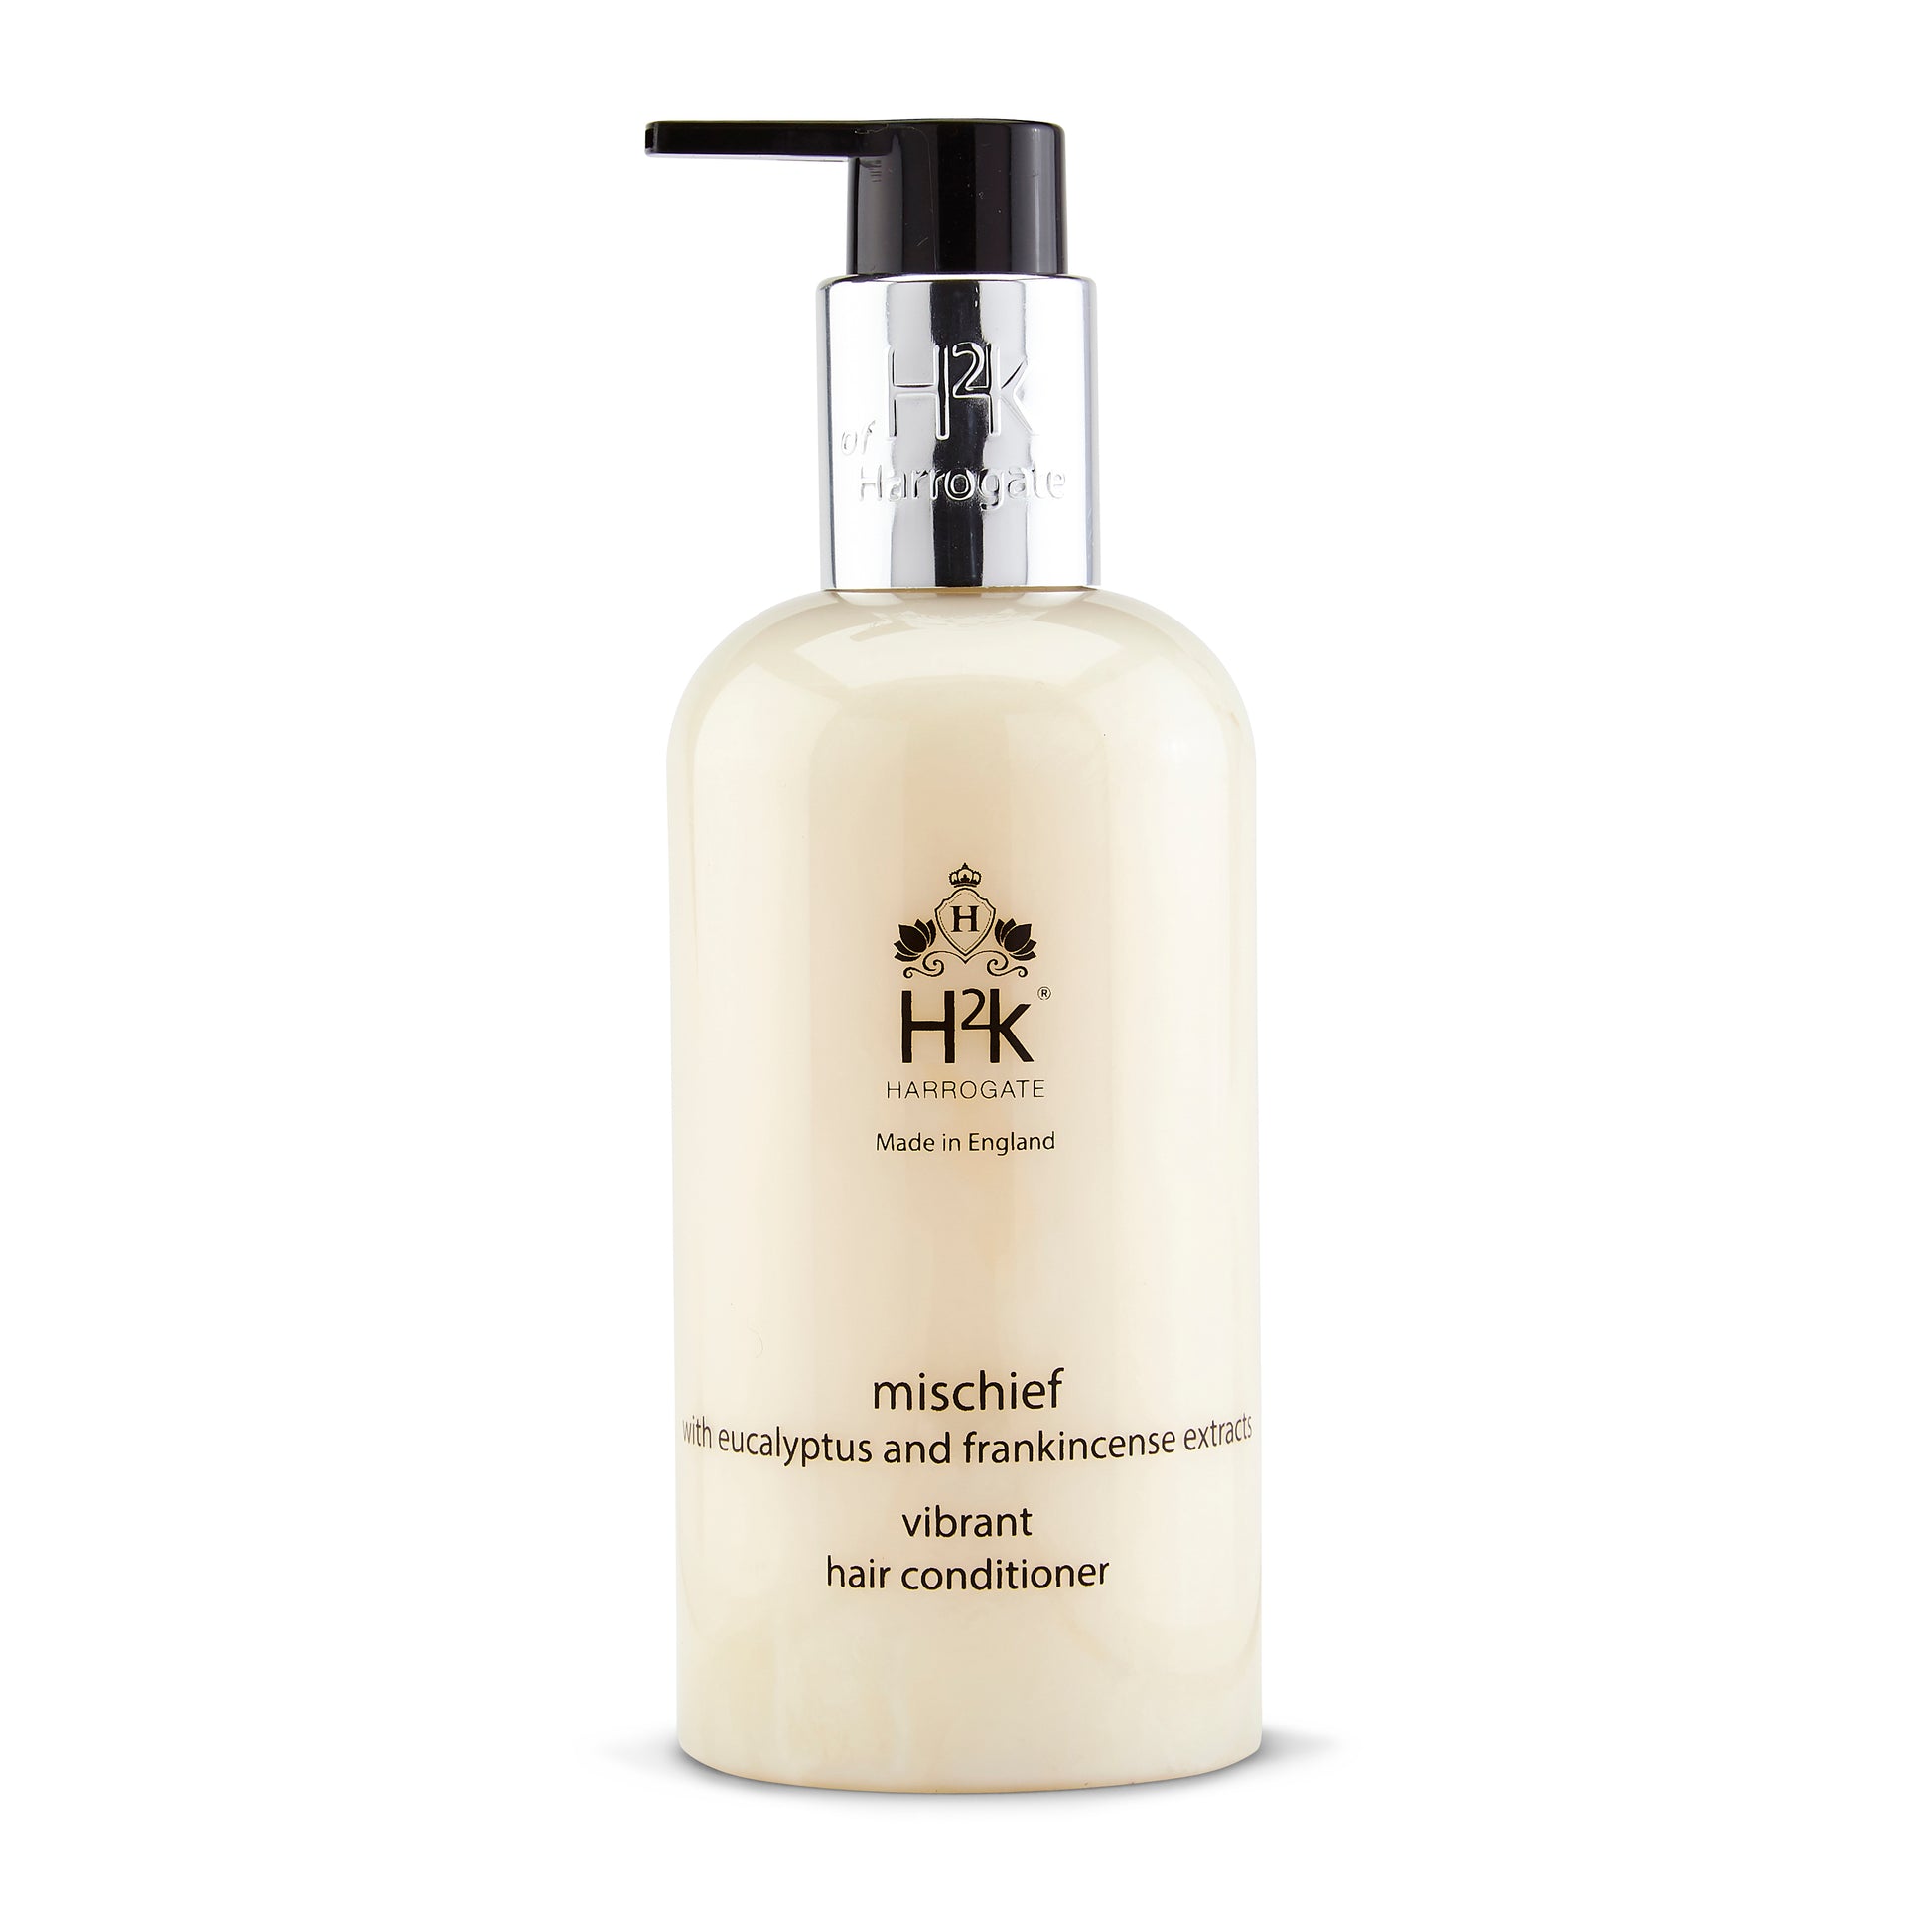 Nourishing Hair Conditioner for Dry Hair with Frankincense and Eucalpytus.